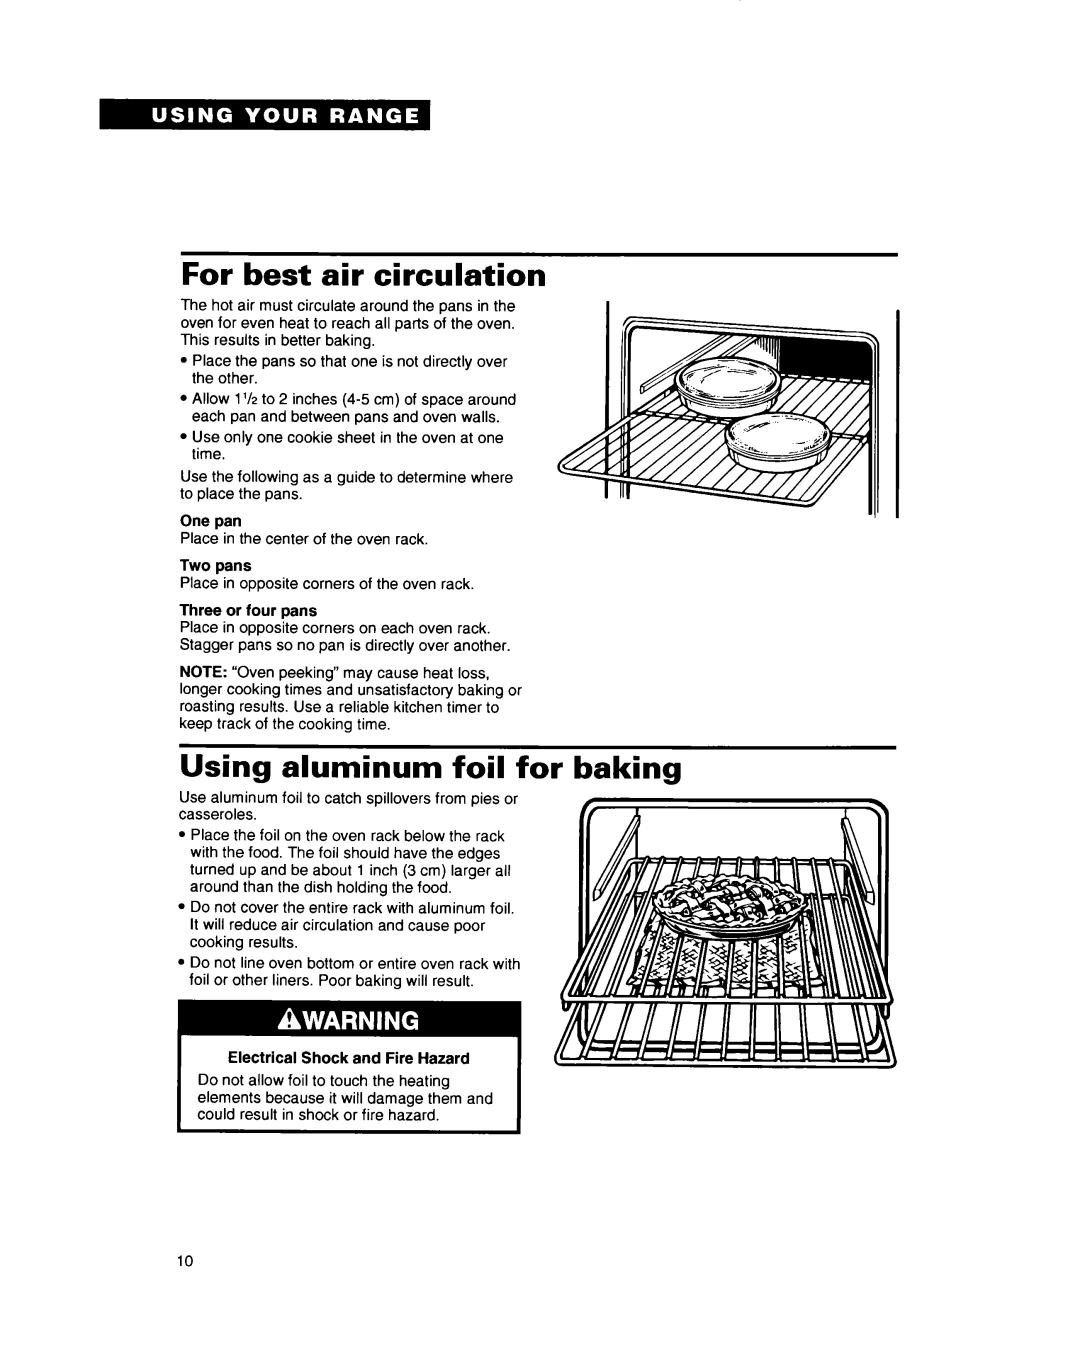 Whirlpool RF396PXY manual For best air circulation, Using aluminum foil for baking, One pan, Two pans, Three or four pans 